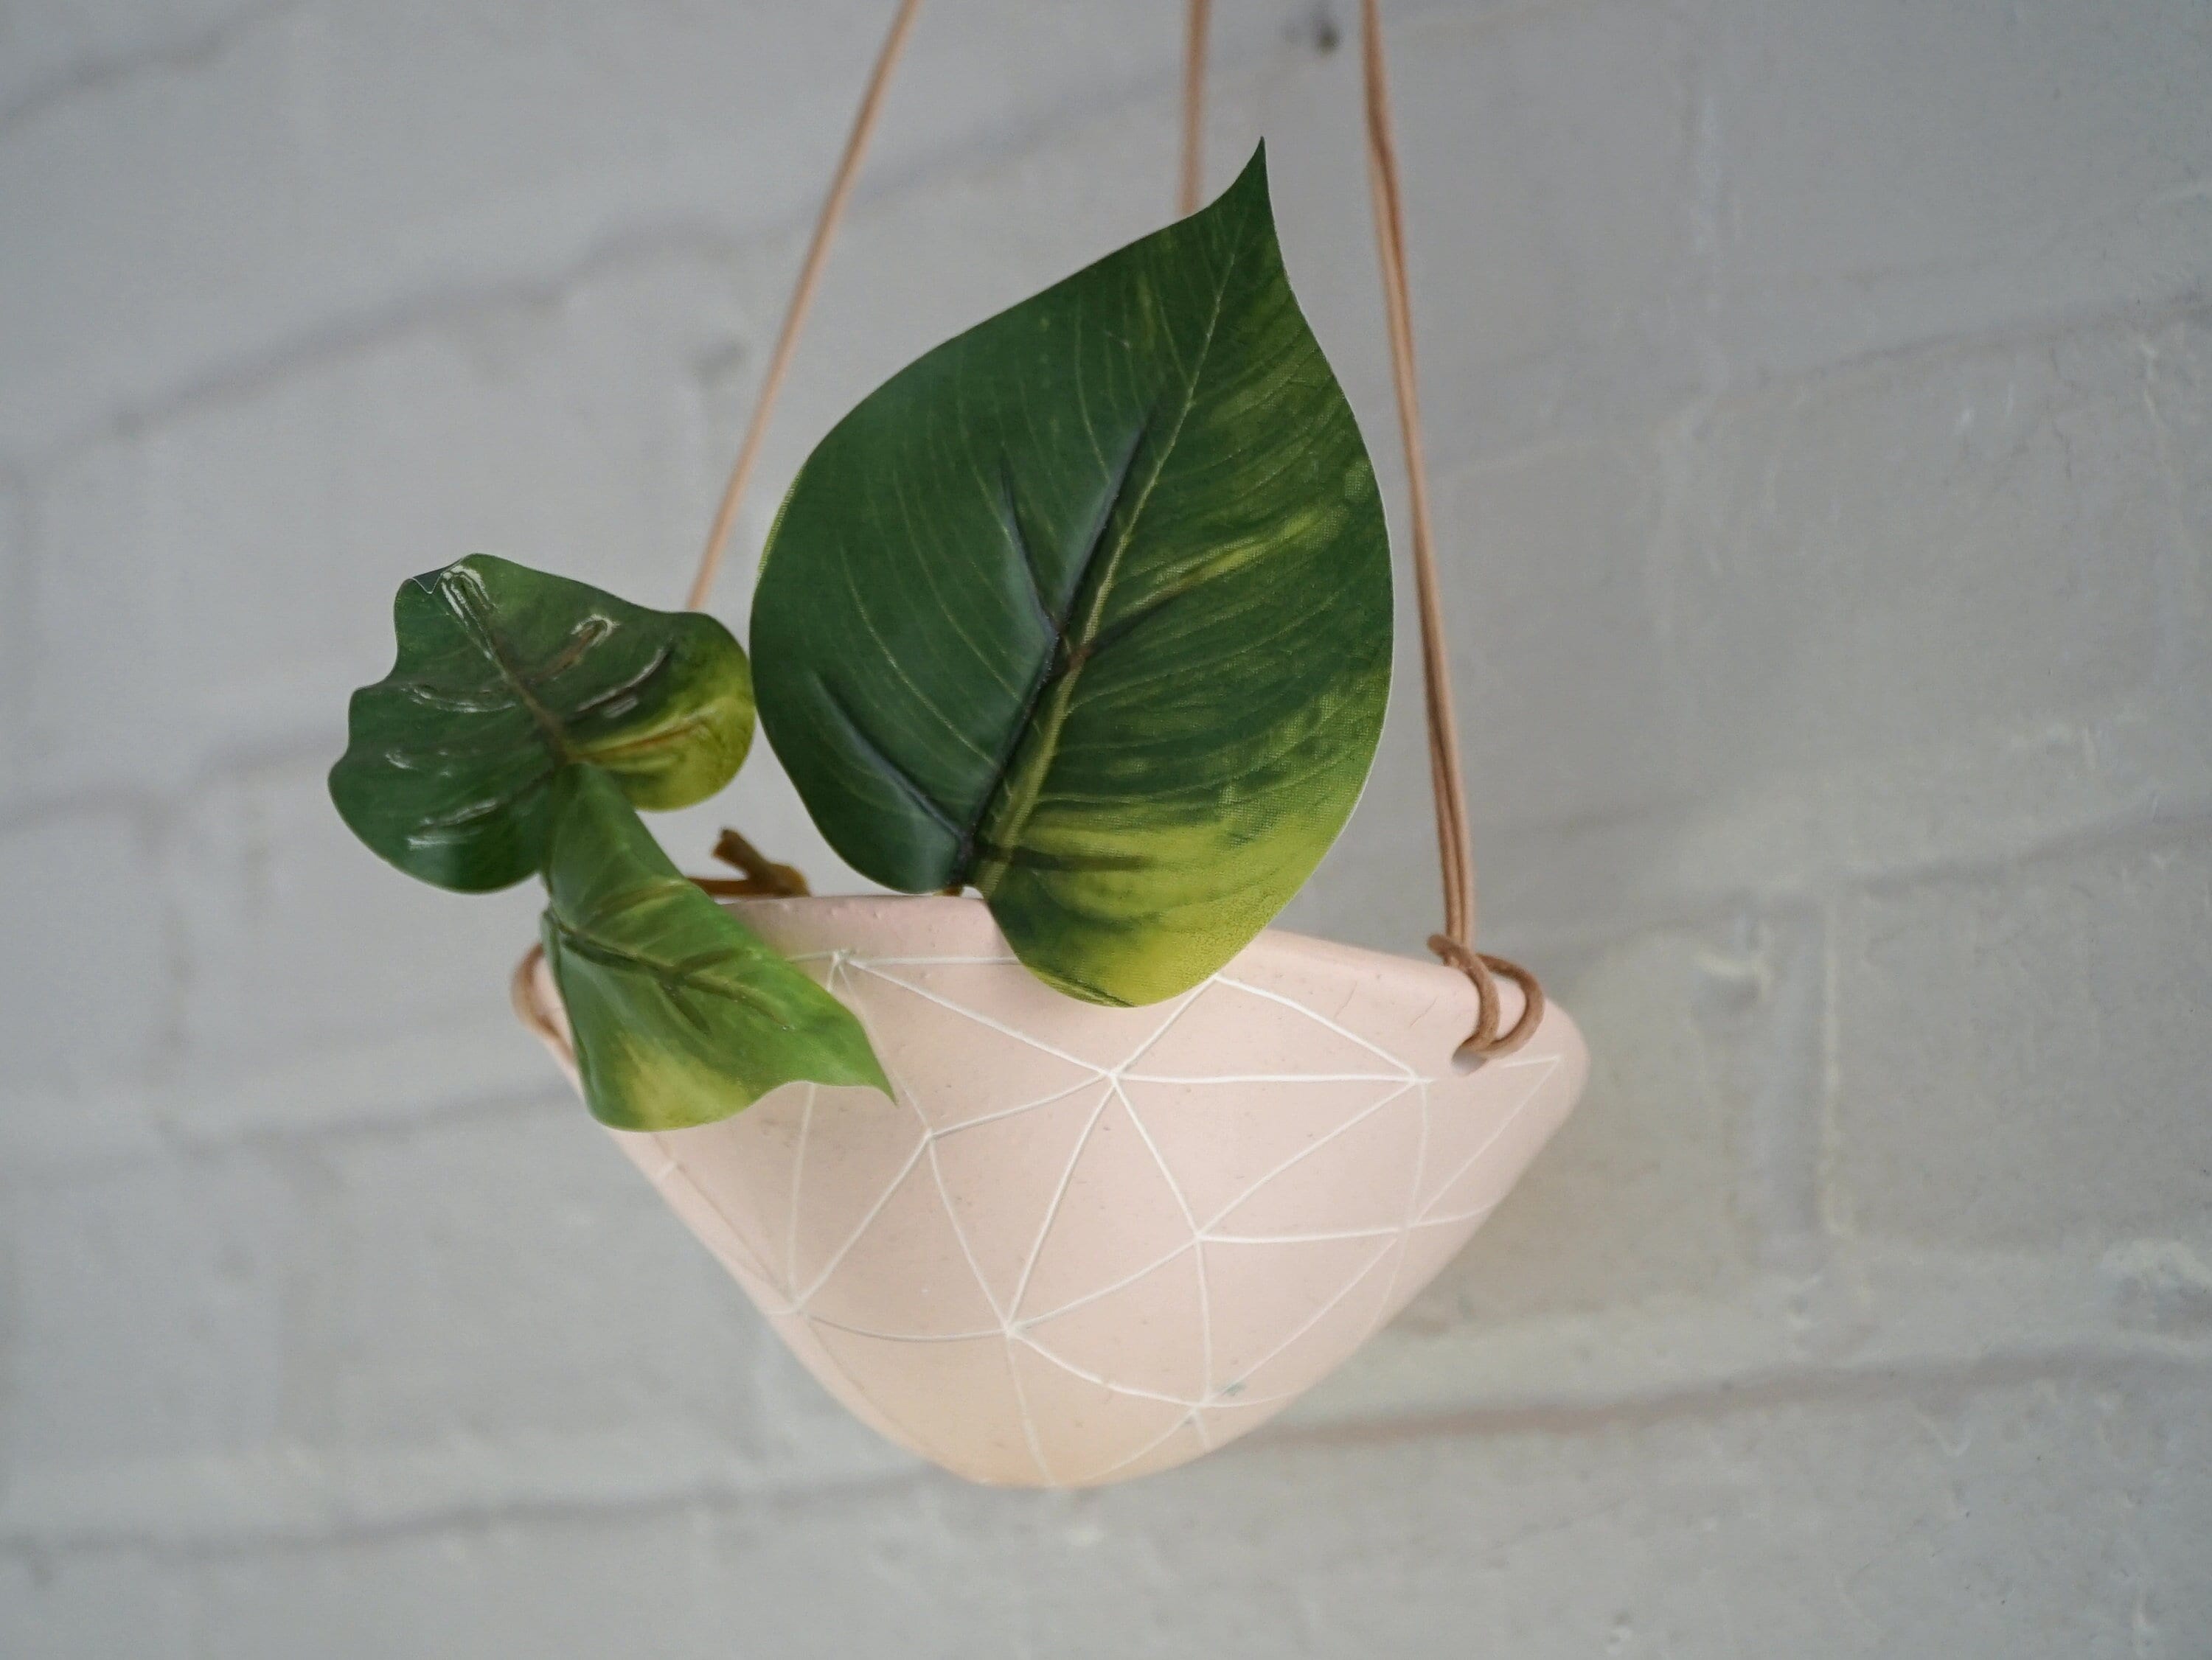 Pink & White Mini Hanging Planter w/ "Geotriangle" Design - Small Hanging Pot with Carved Design - Propagating, Starter Pot, Air Plant Pot